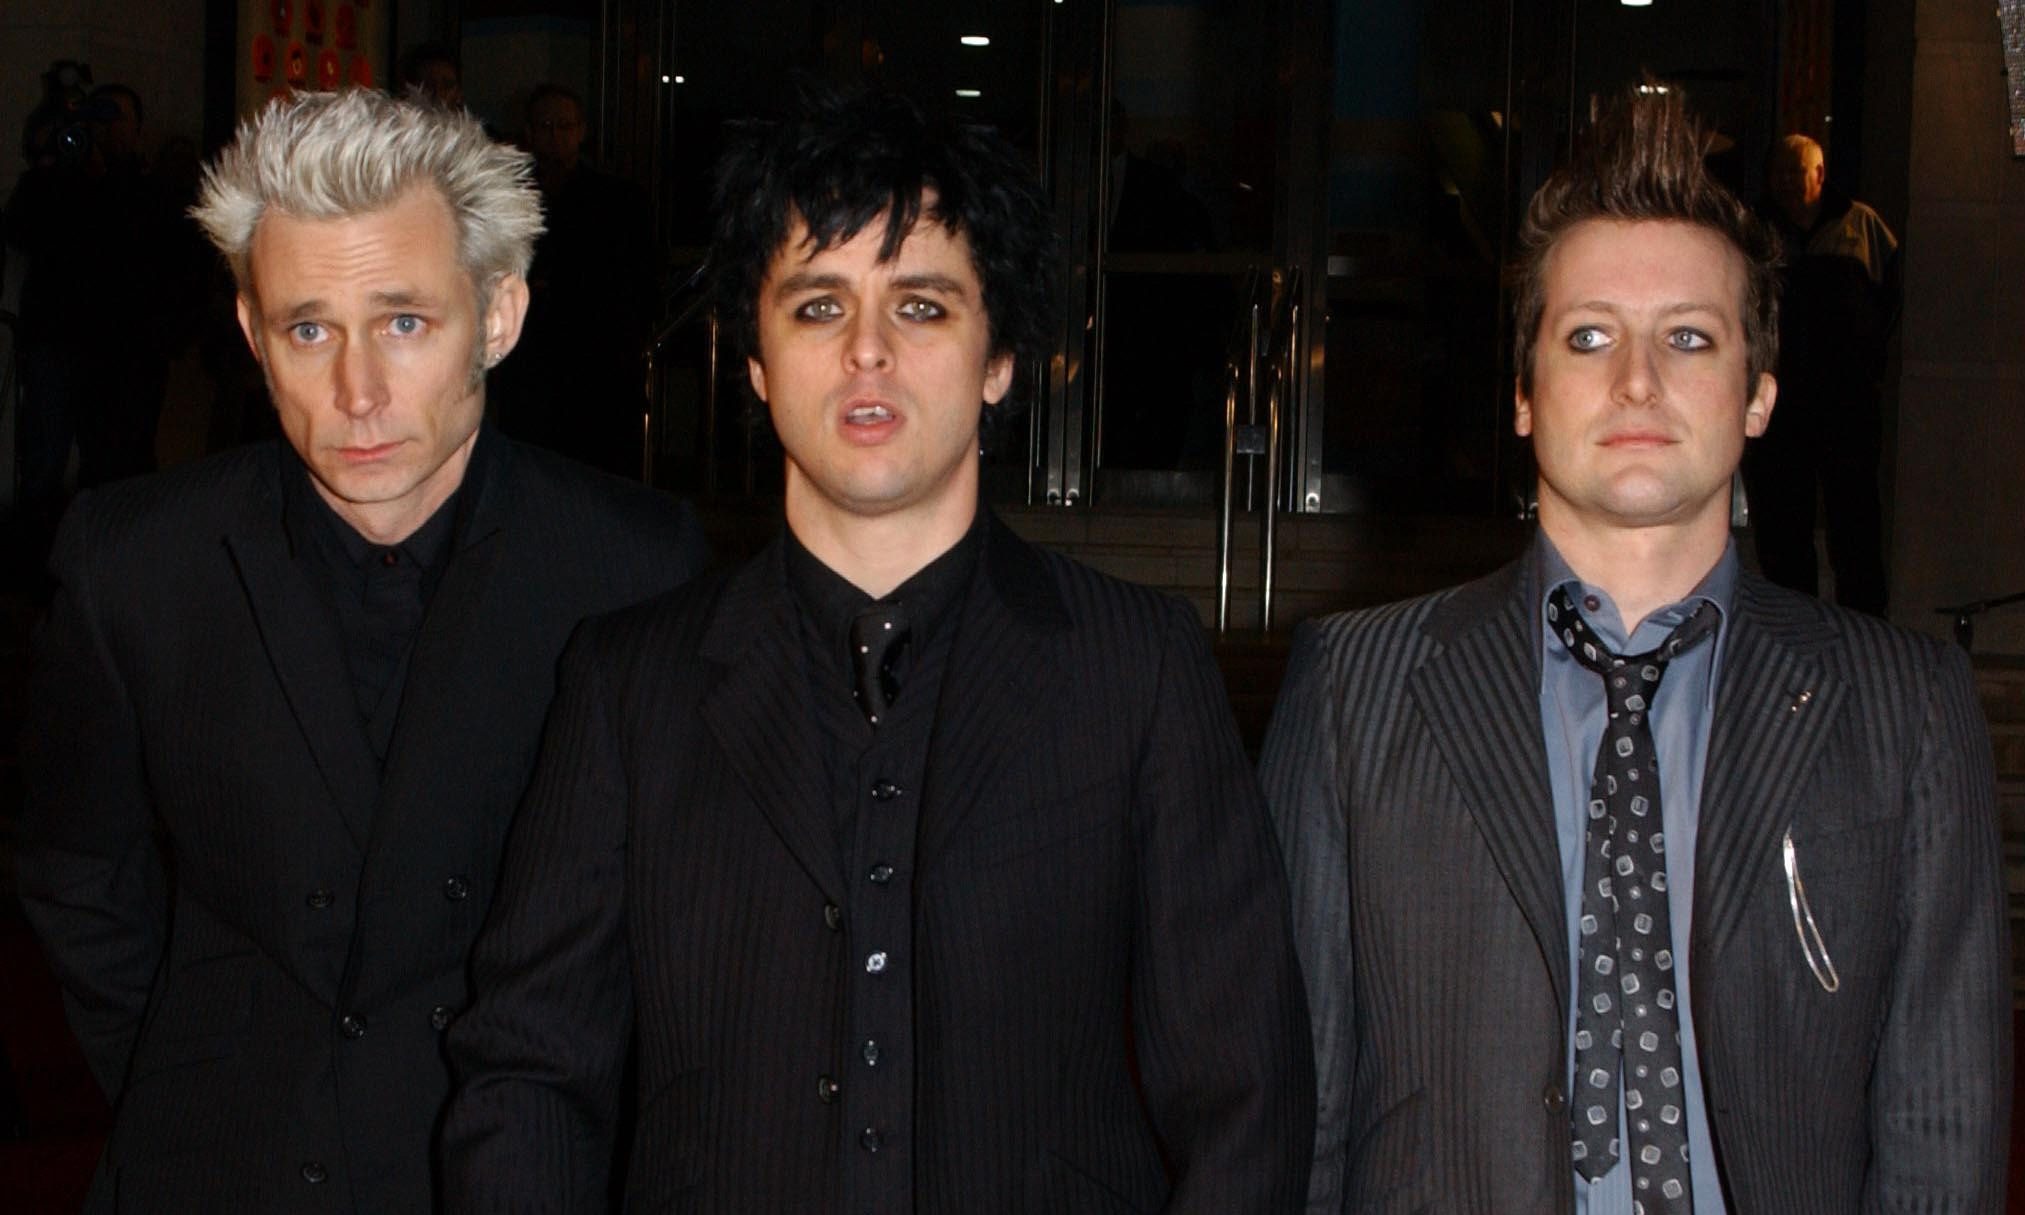 American band Green Day.